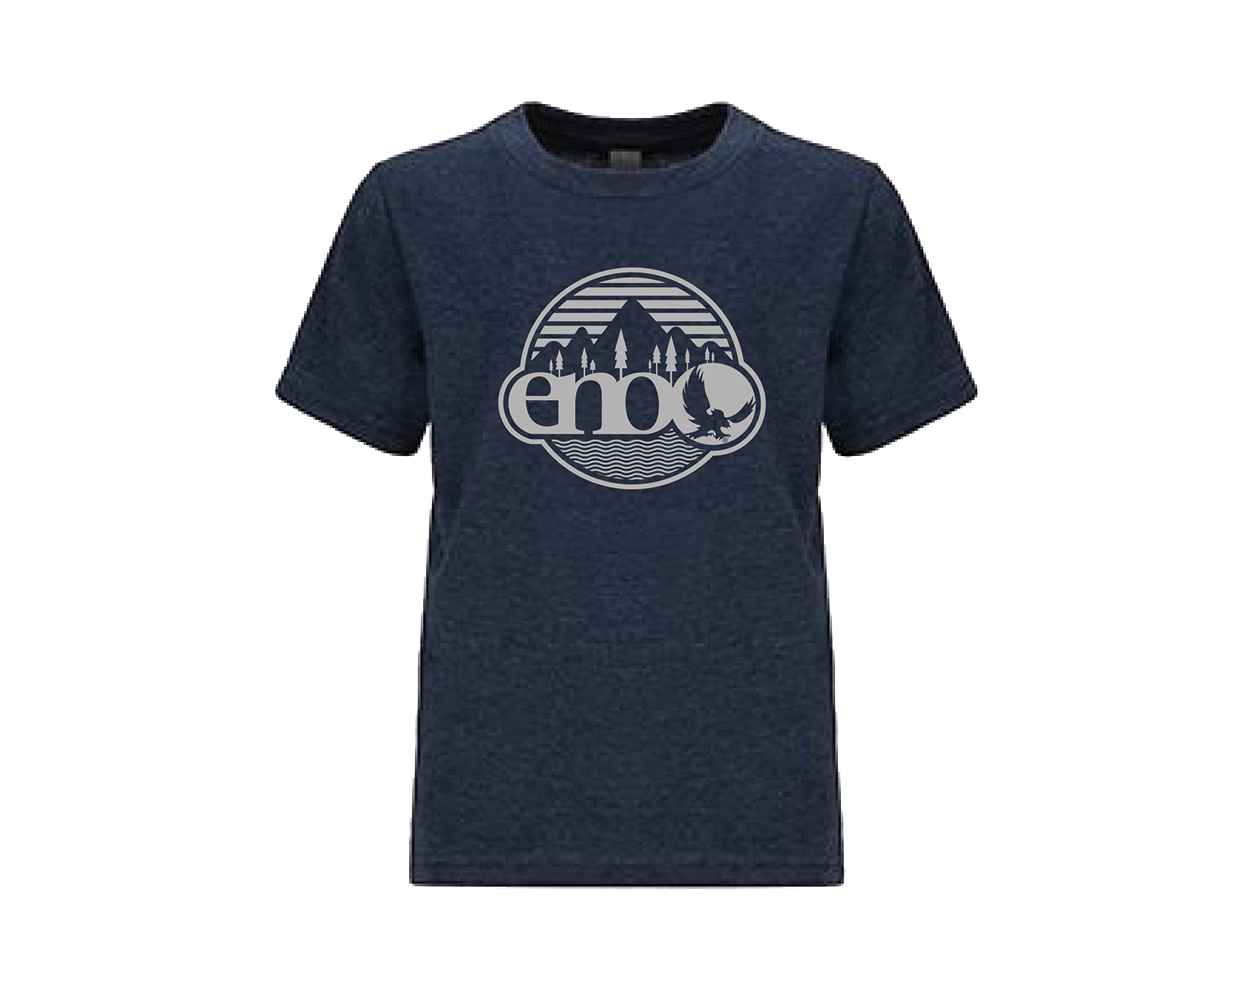 Eagles Nest Outfitters, Inc. Apparel & Merch, ENO Youth's Nature Tee